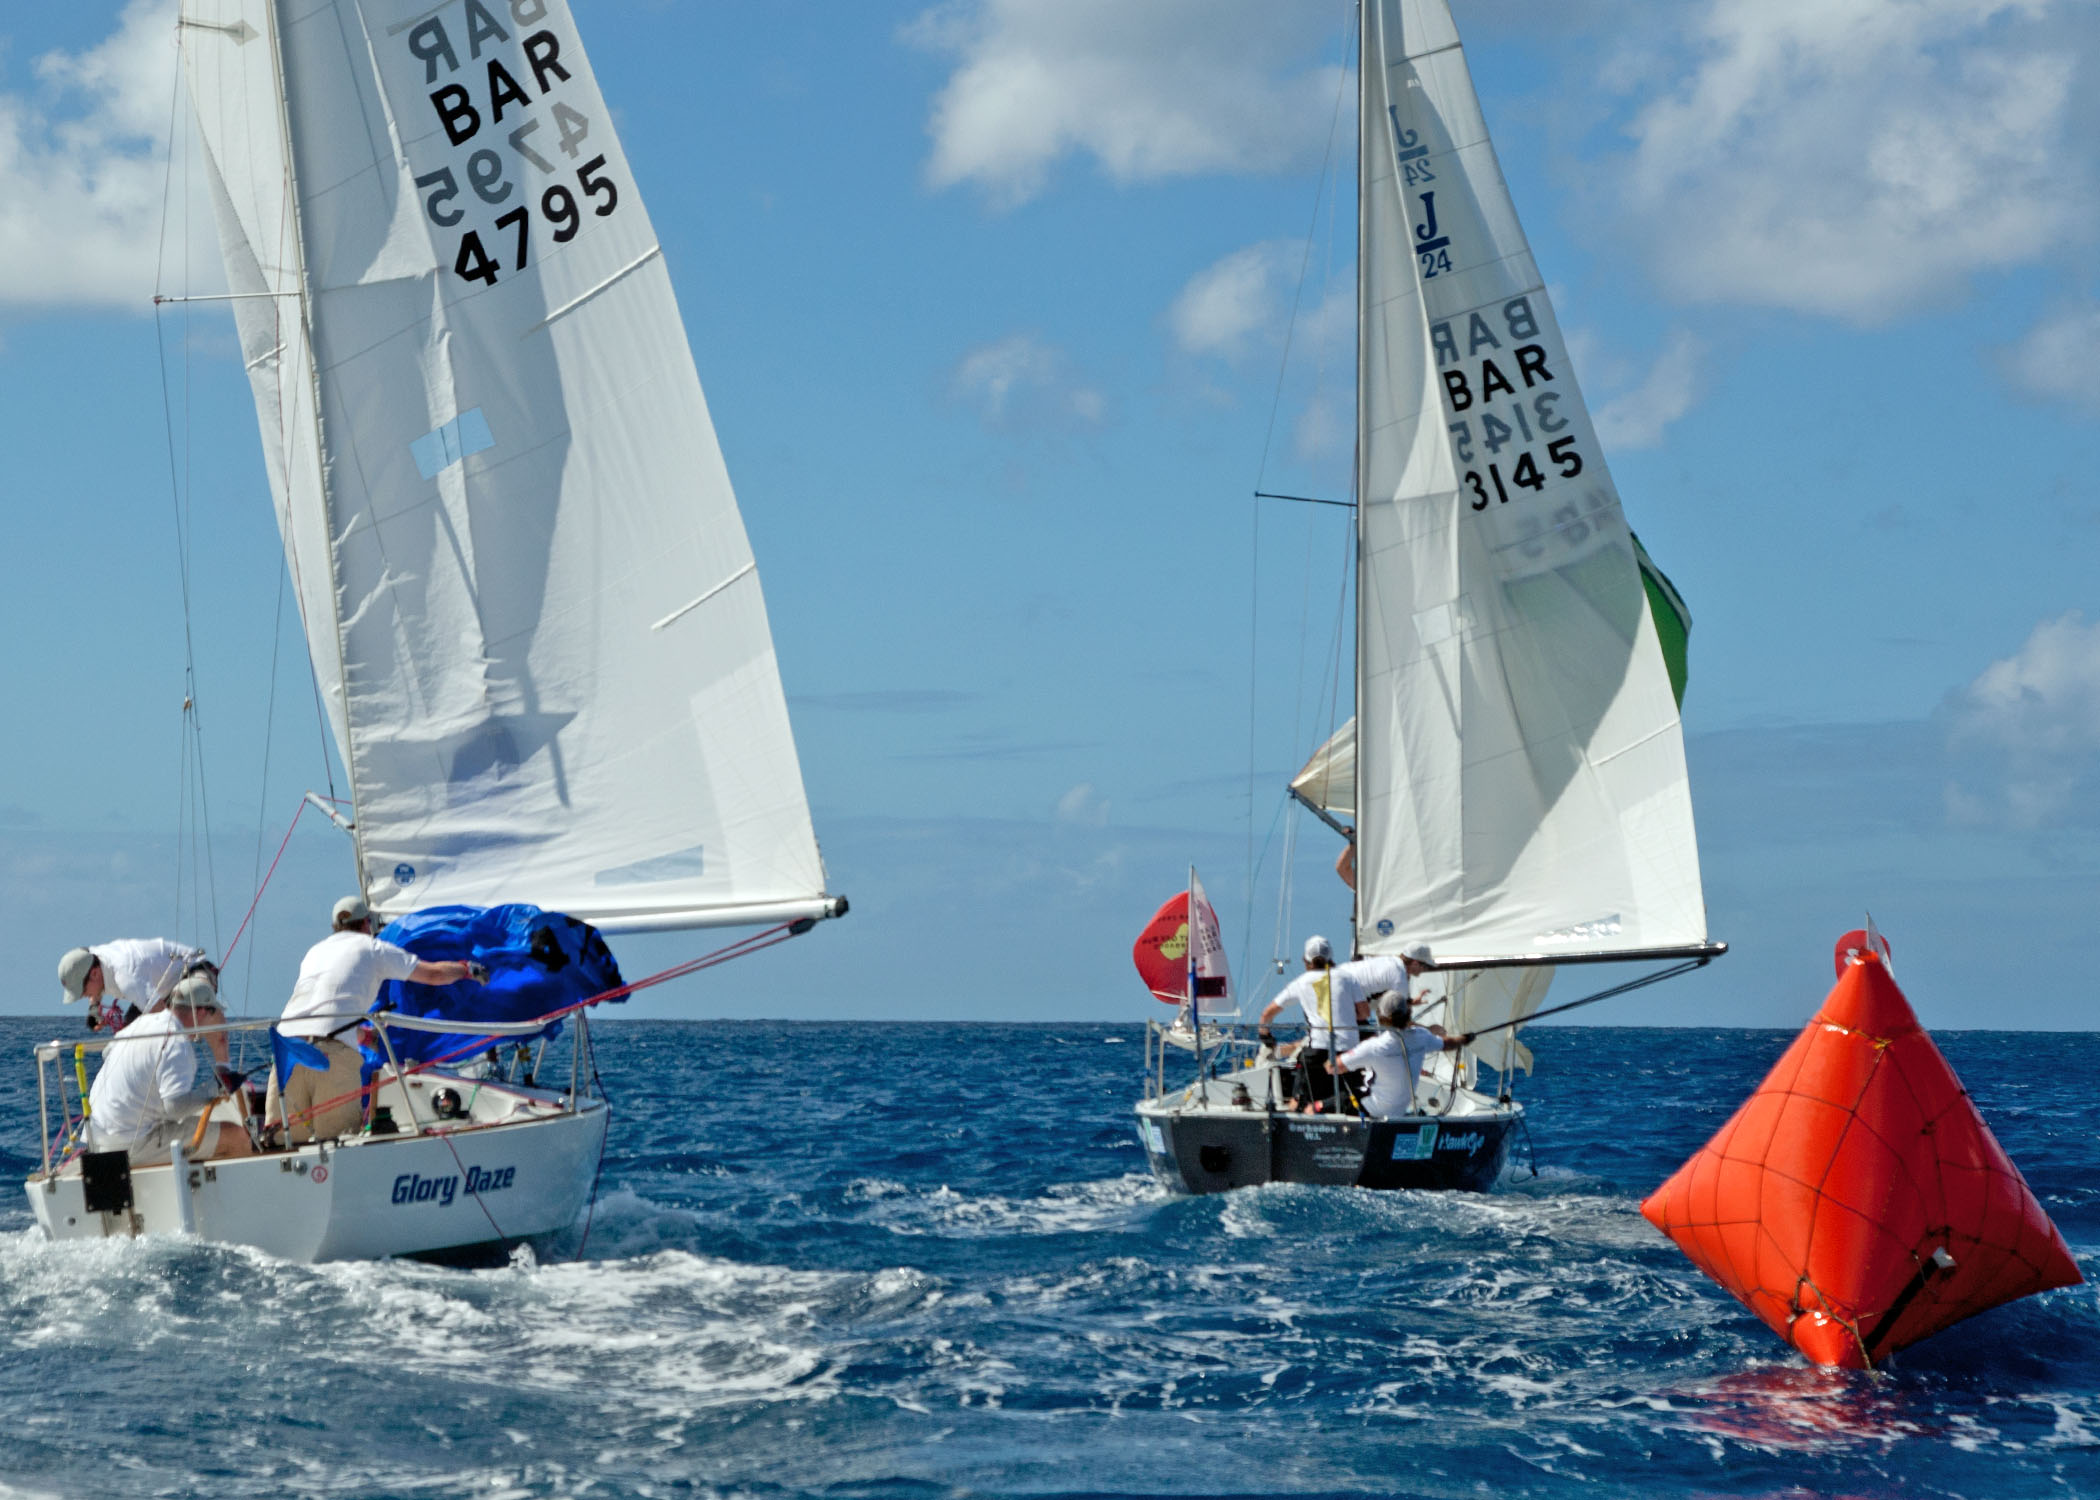 Pete Wickwire 2nd overall in ISAF N.A and Caribbean Match Race Qualifier